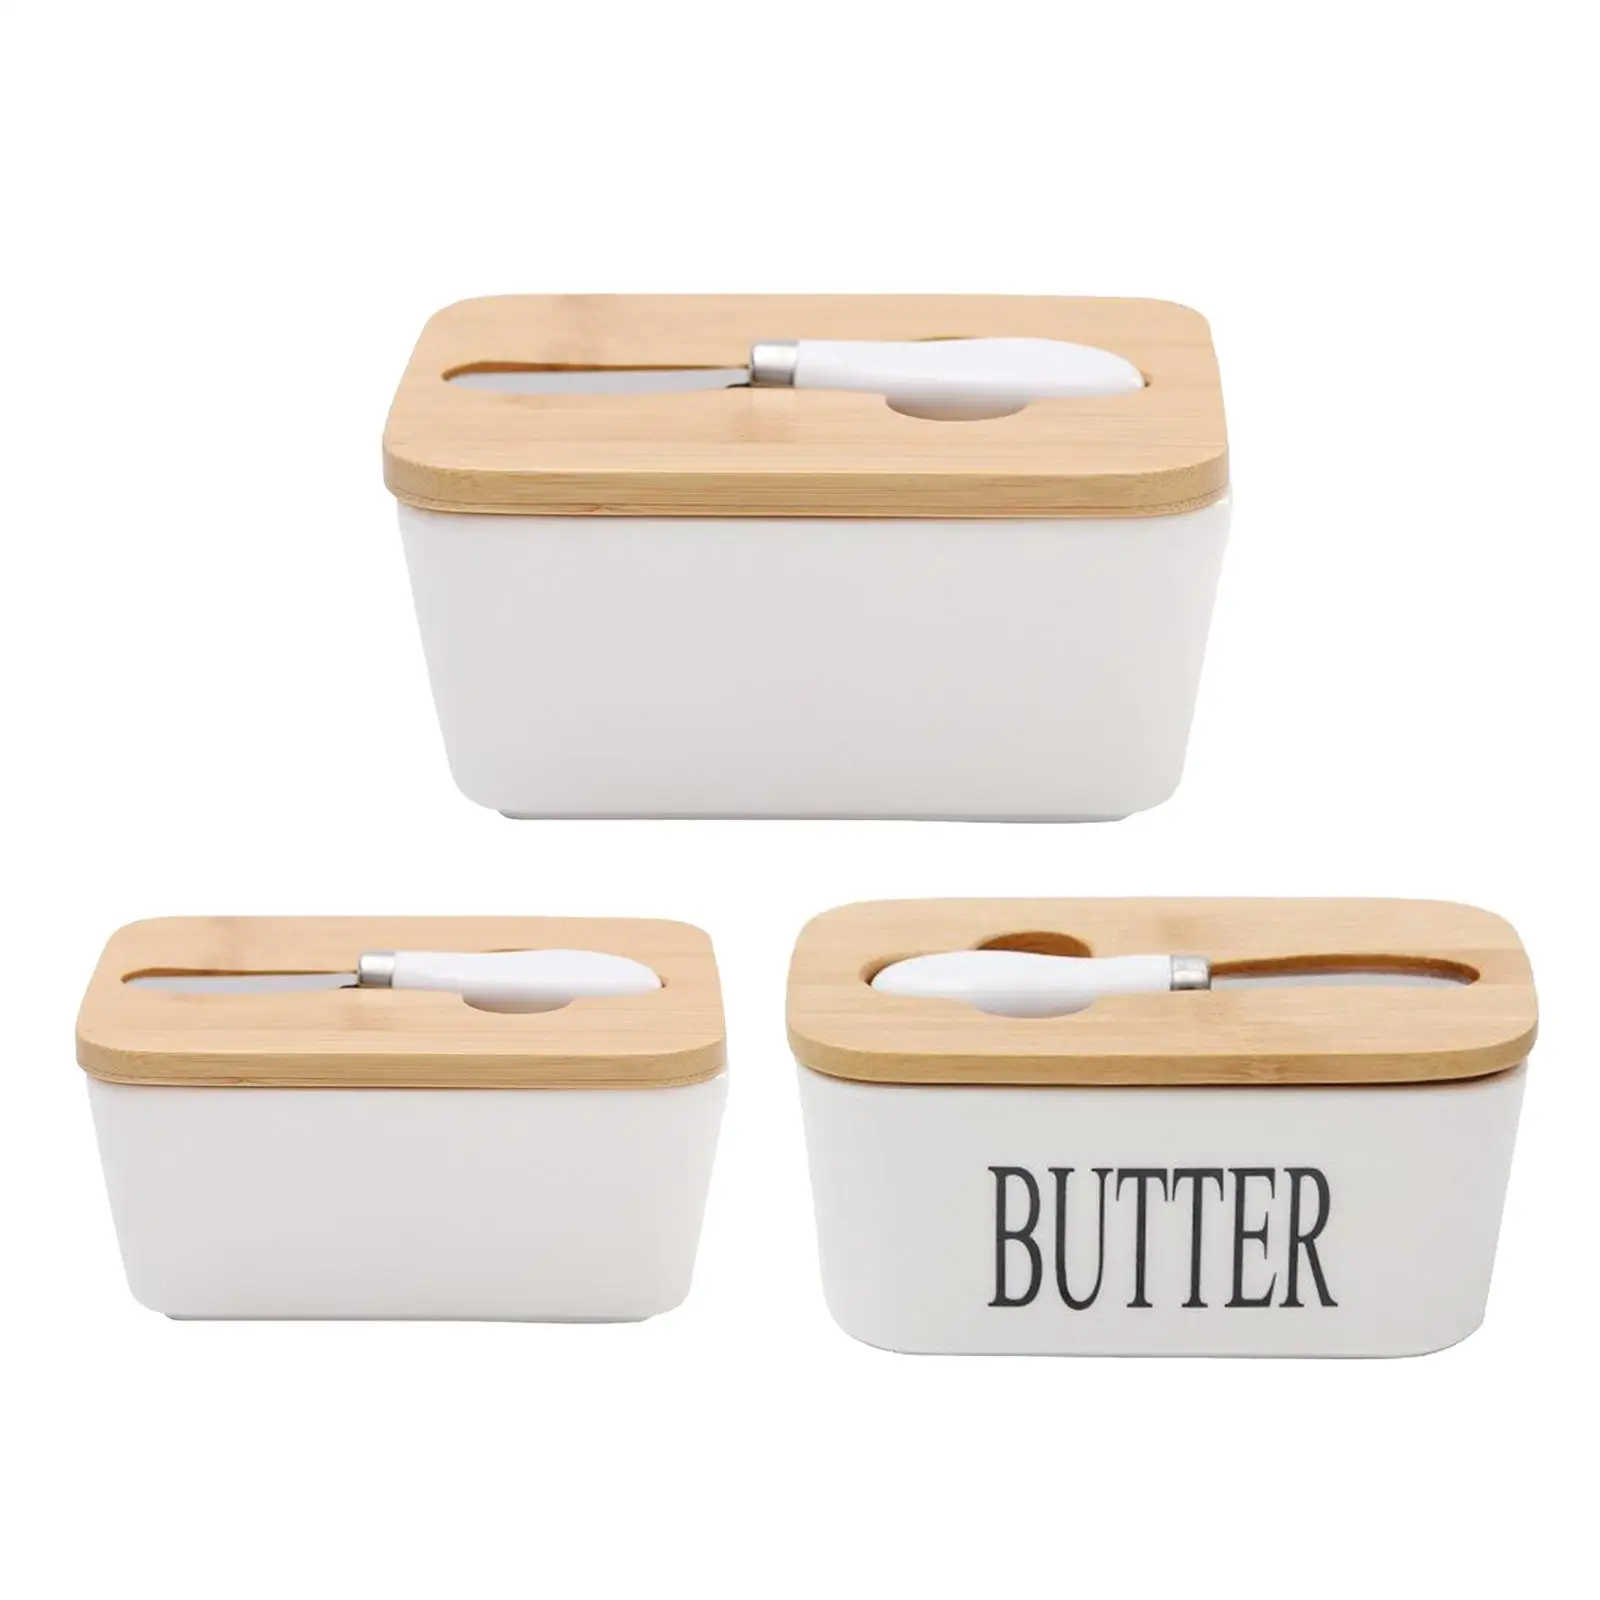 Butter Dish Ceramic Butter Container Keeper with Wooden Lid and Steel Knife, Eay to Clean, 2 Sizes Available to Choose